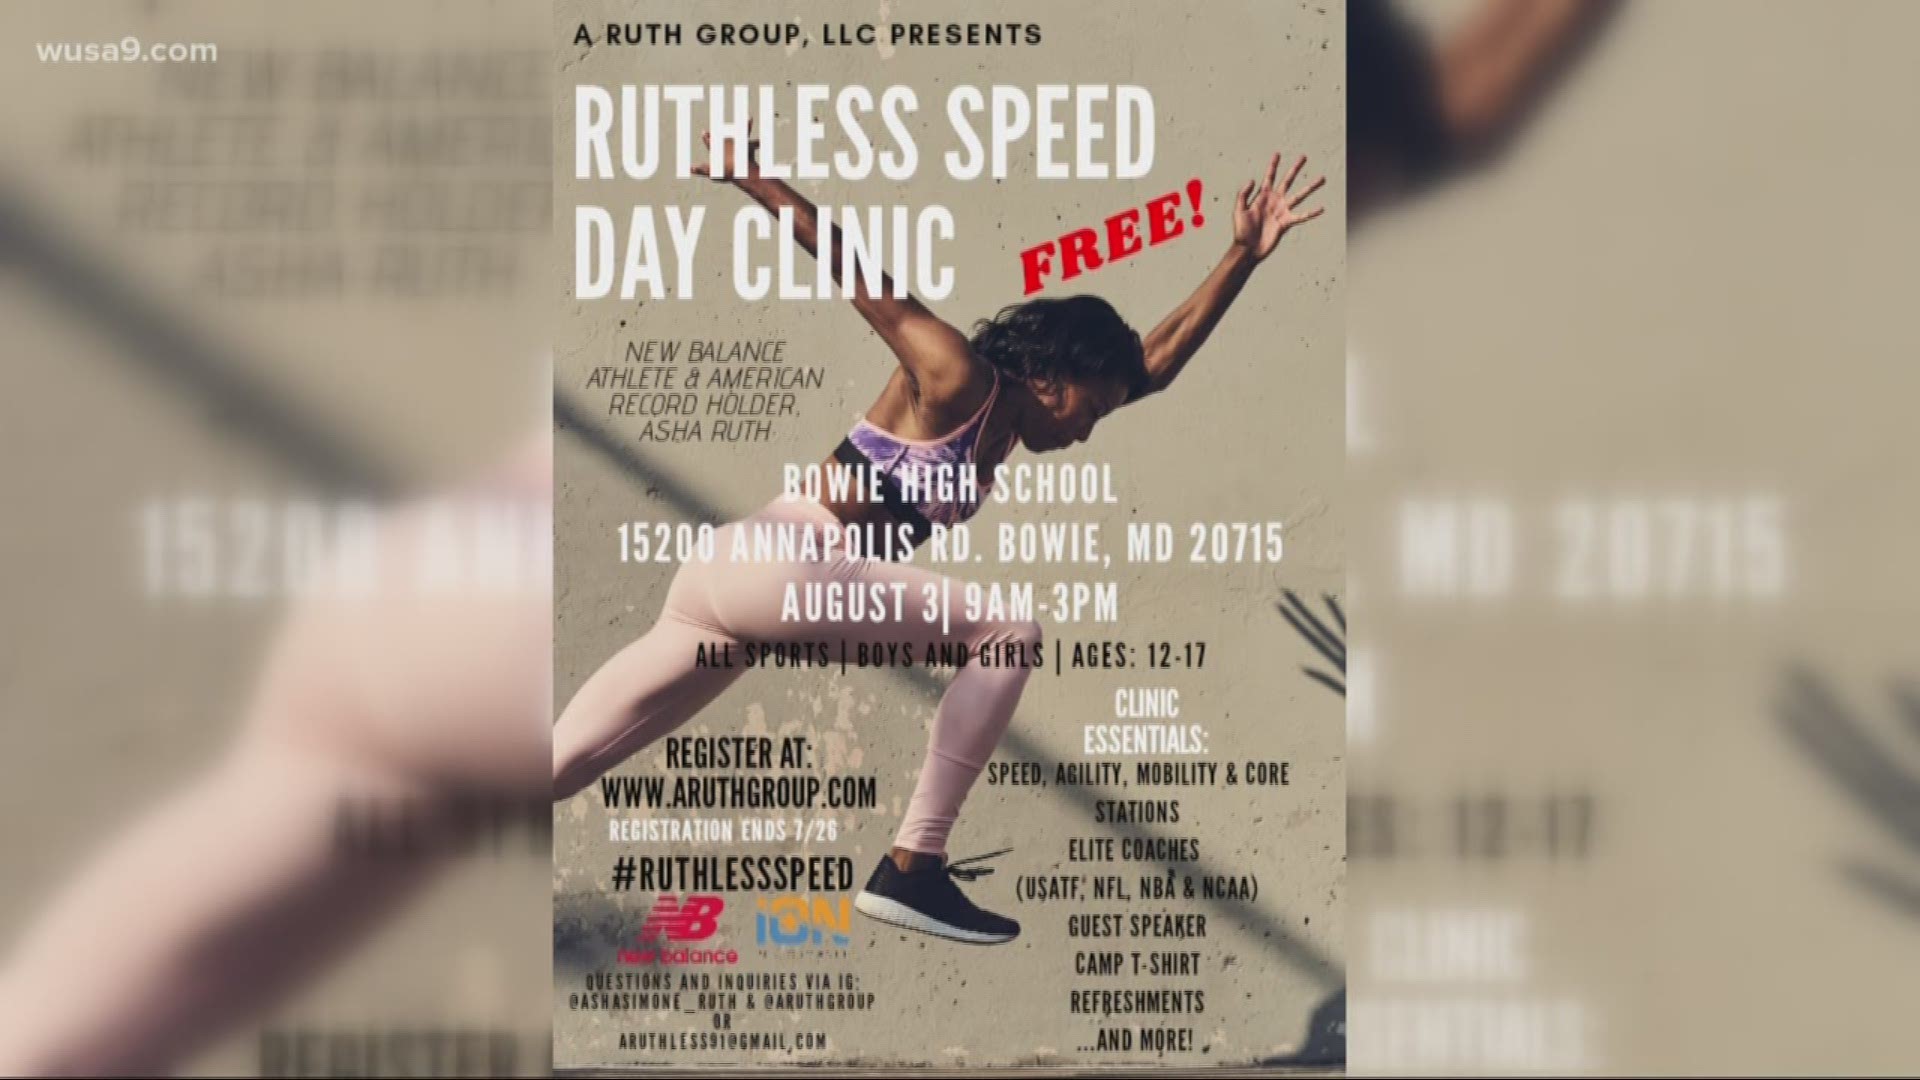 Asha Ruth, a Bowie High graduate is an American record holder. She's passionate about helping younger athletes pursue their dreams. Later this summer, she'll be hosting her inaugural "Ruthless Speed Day Clinic," in Bowie.